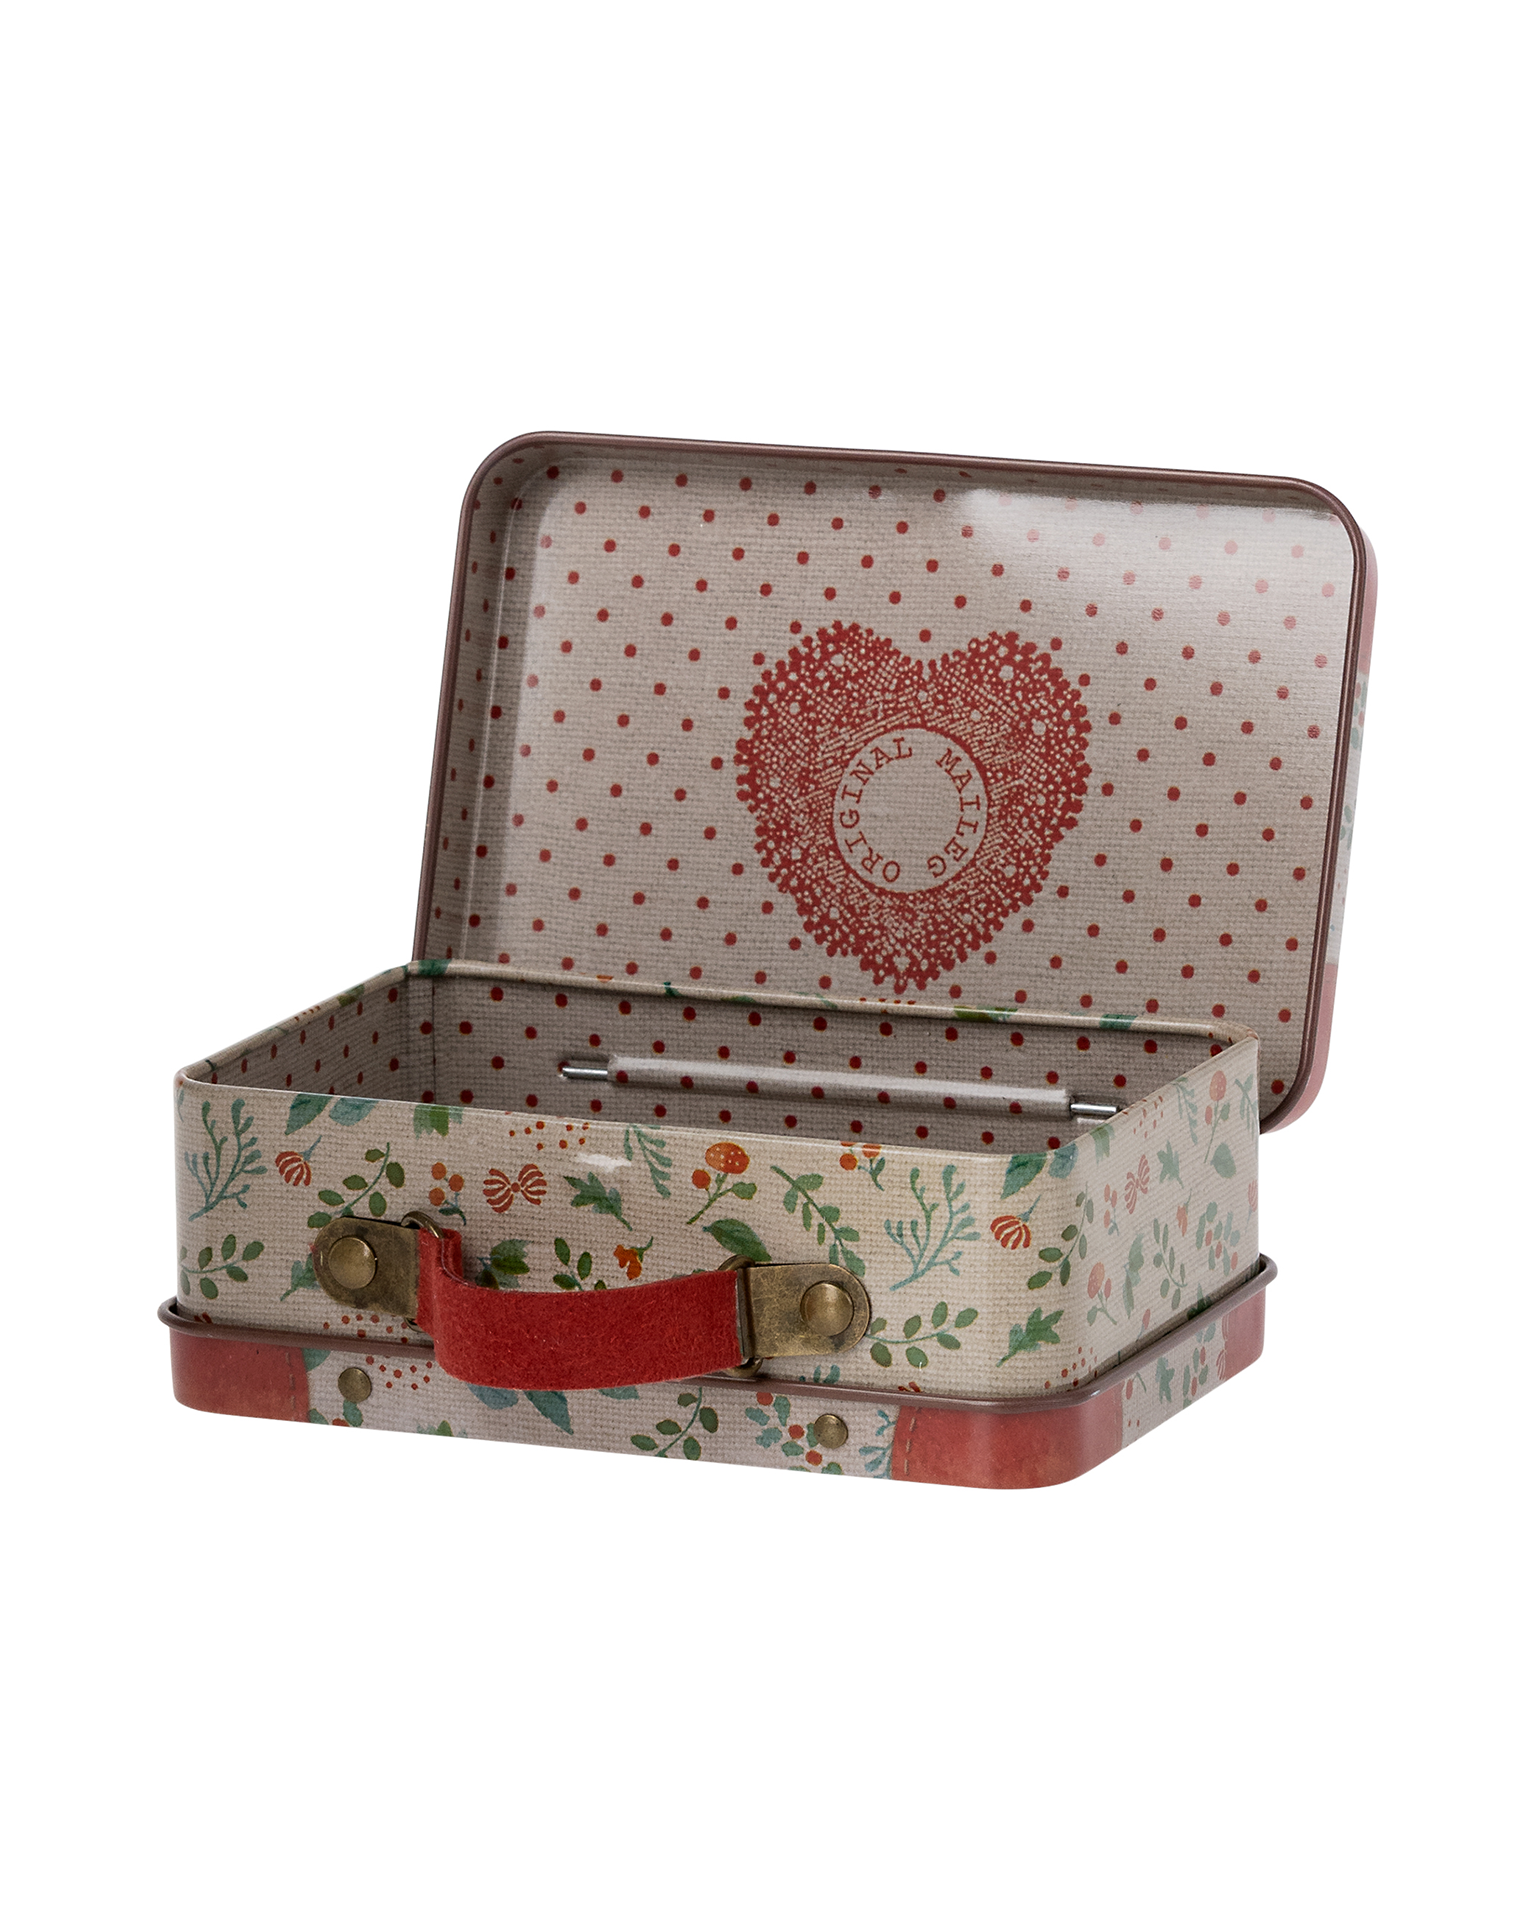 Little maileg play suitcase in holly